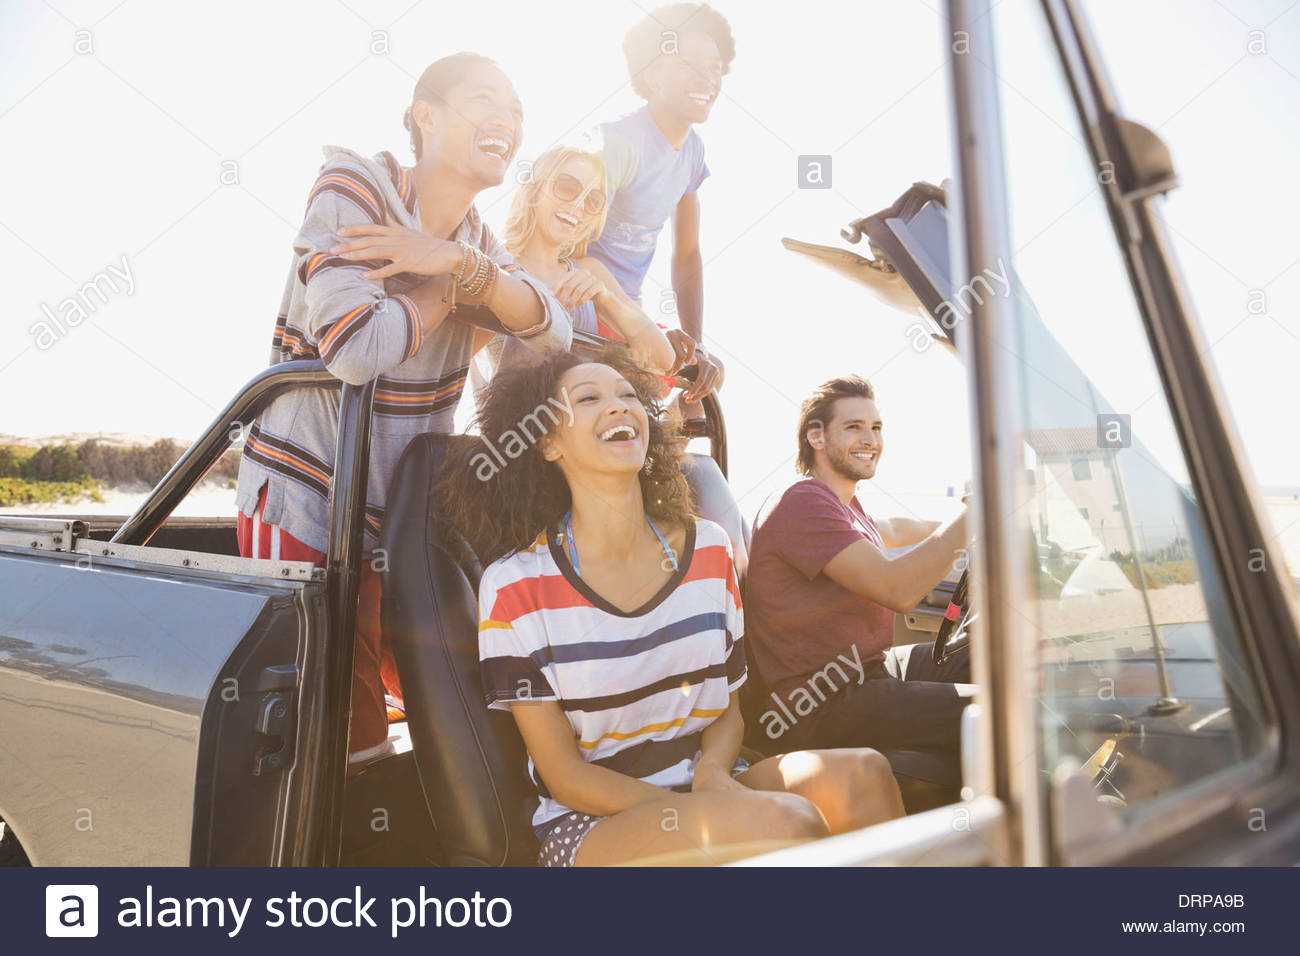 Group of friends taking a day trip to the beach Stock Photo